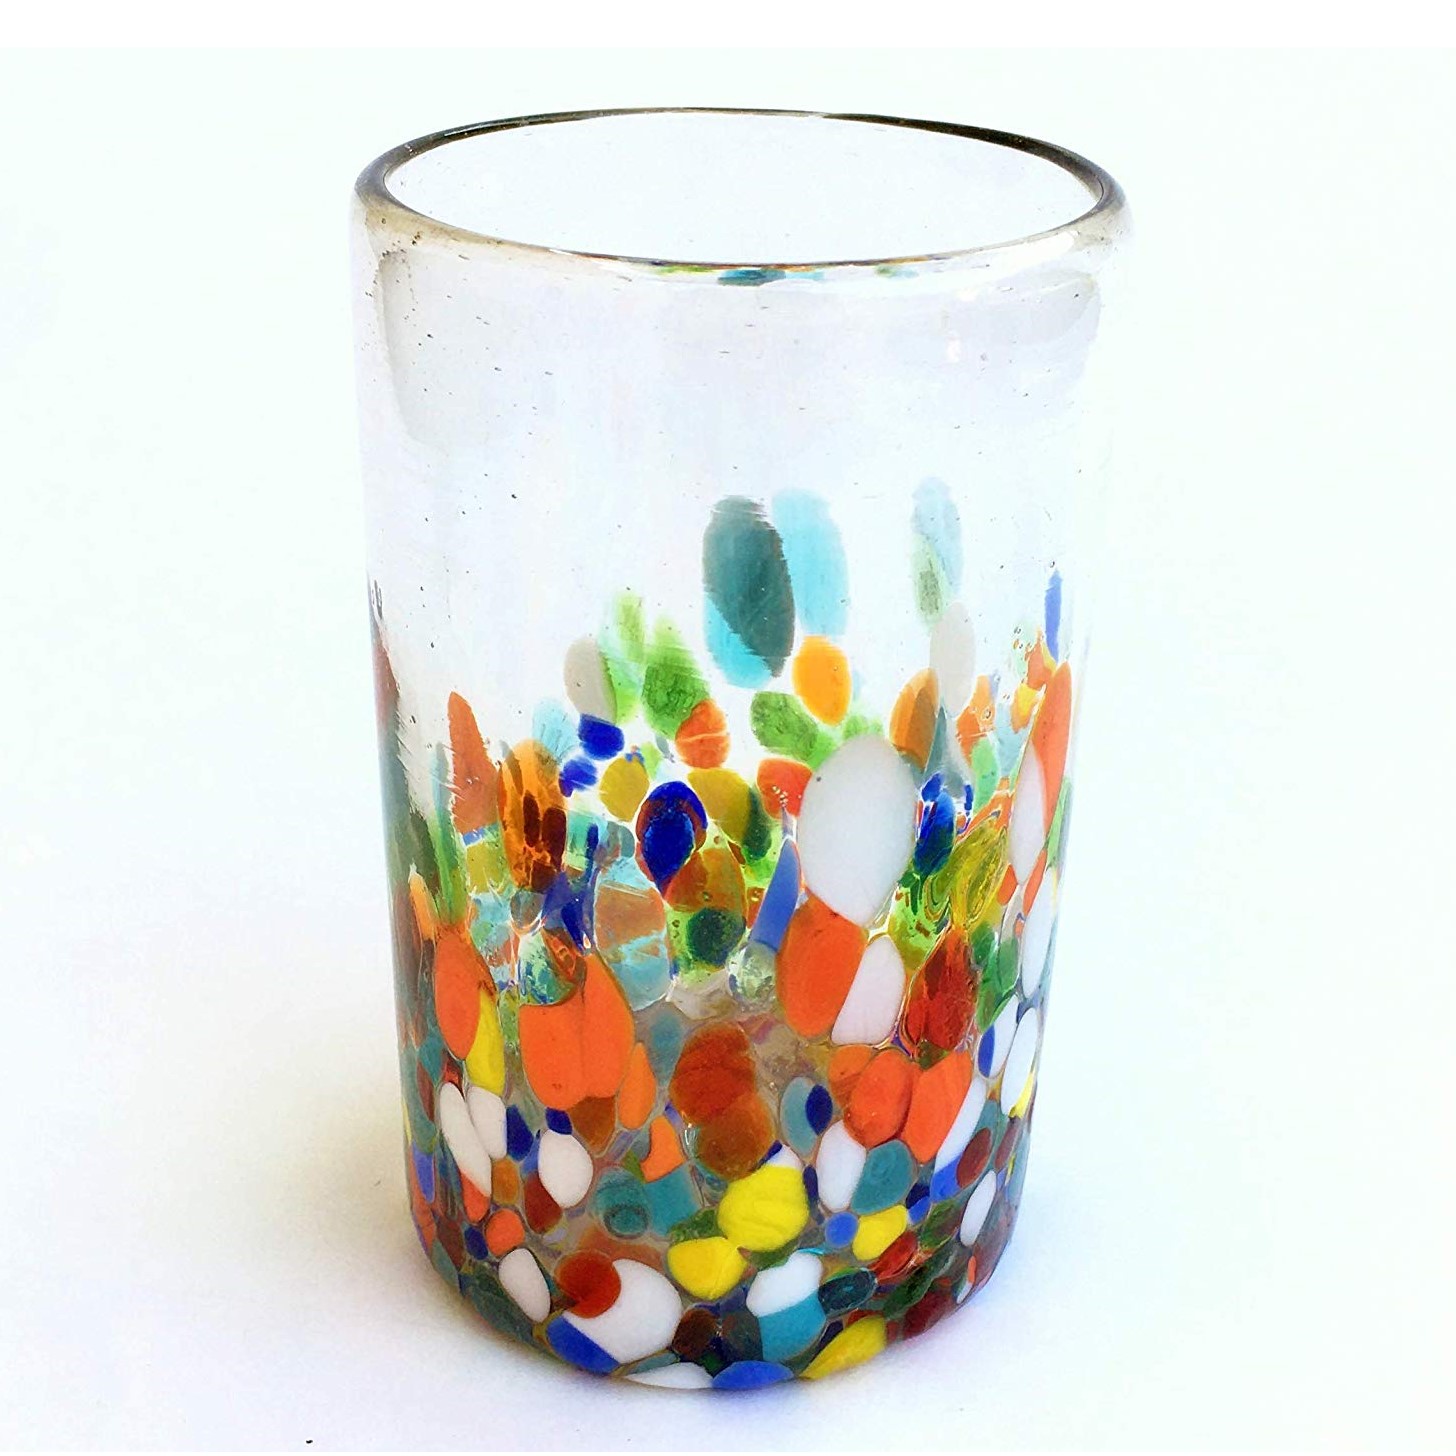 Sale Items / Clear & Confetti 14 oz Drinking Glasses (set of 6) / Our Clear & Confetti drinking glasses combine the best of two worlds: clear, thick, sturdy handcrafted glass on top, meets the colorful, festive, confetti bottom! These glasses will sure be a standout in any table setting or as a fabulous gift for your loved ones. Crafted one by one by skilled artisans in Tonala, Mexico, each glass is different from the next making them unique works of art. You'll be amazed at how they make having a simple glass of water a happier experience. Each glass holds approximately 14 oz of liquid and stands a bit over 5